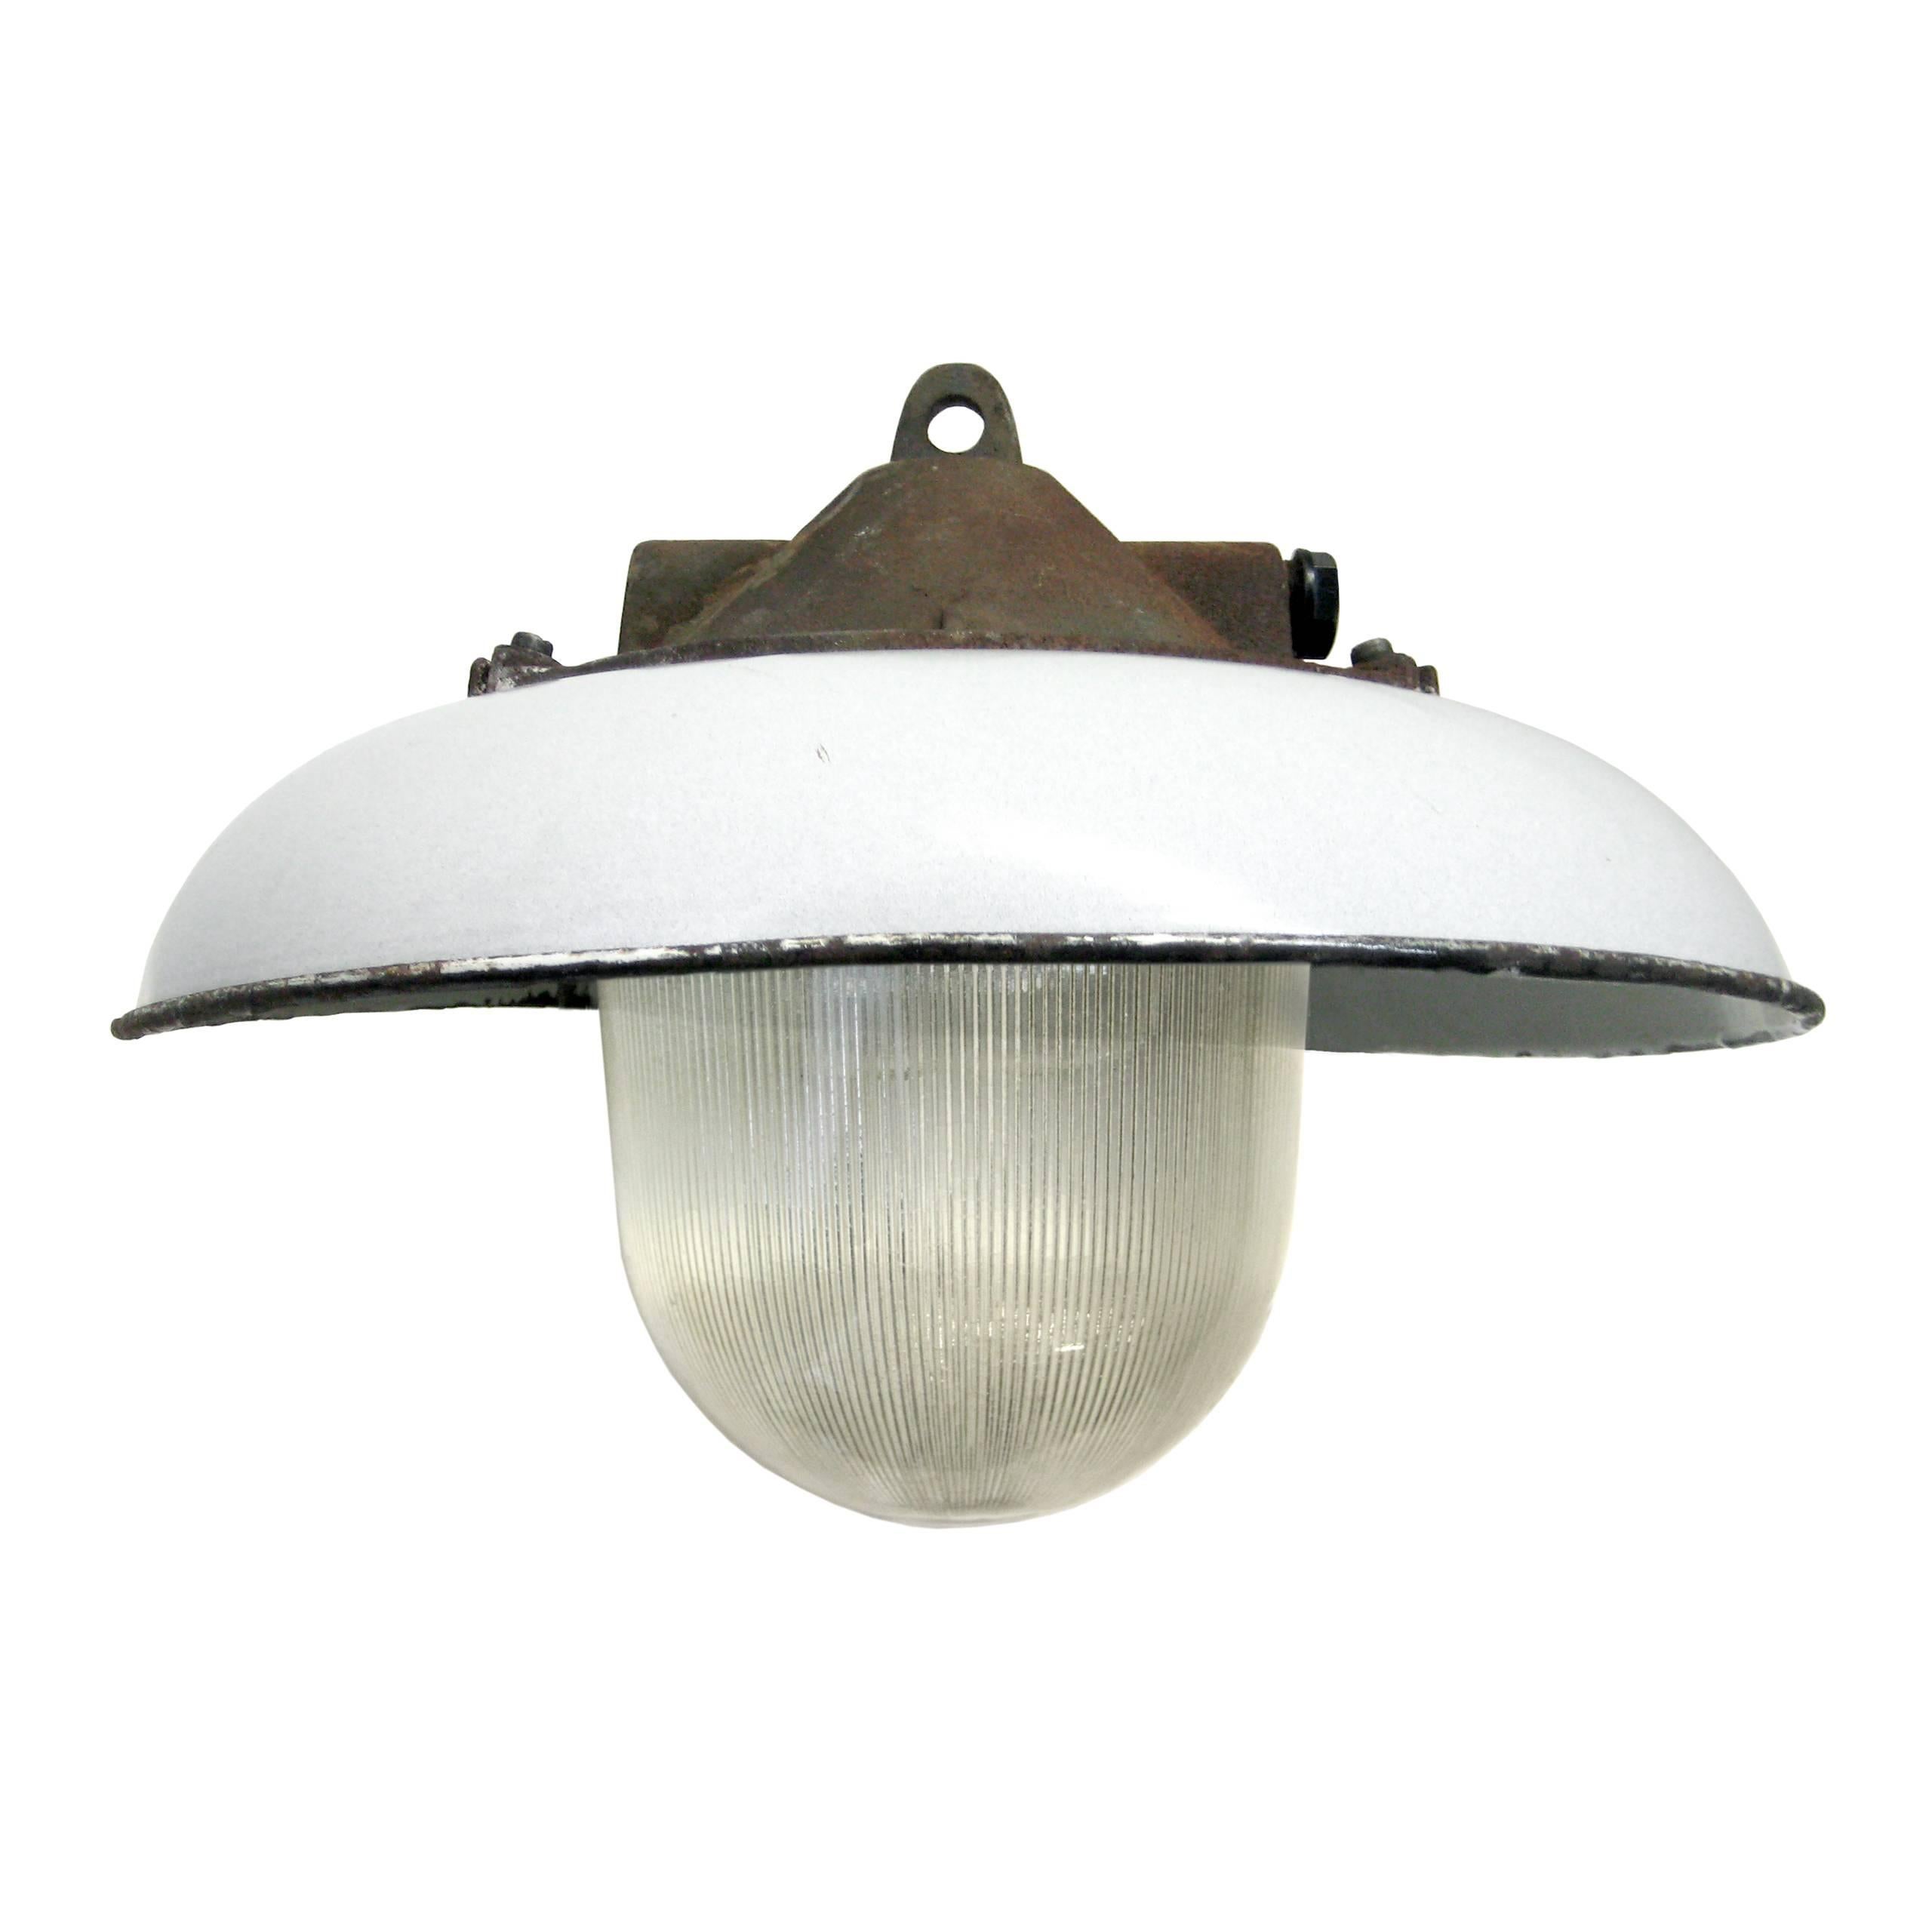 Industrial factory pendant. White enamel shade.
Cast iron top. Holophane glass.

Weight: 6.0 kg / 13.2 lb

Priced per individual item. All lamps have been made suitable by international standards for incandescent light bulbs, energy-efficient